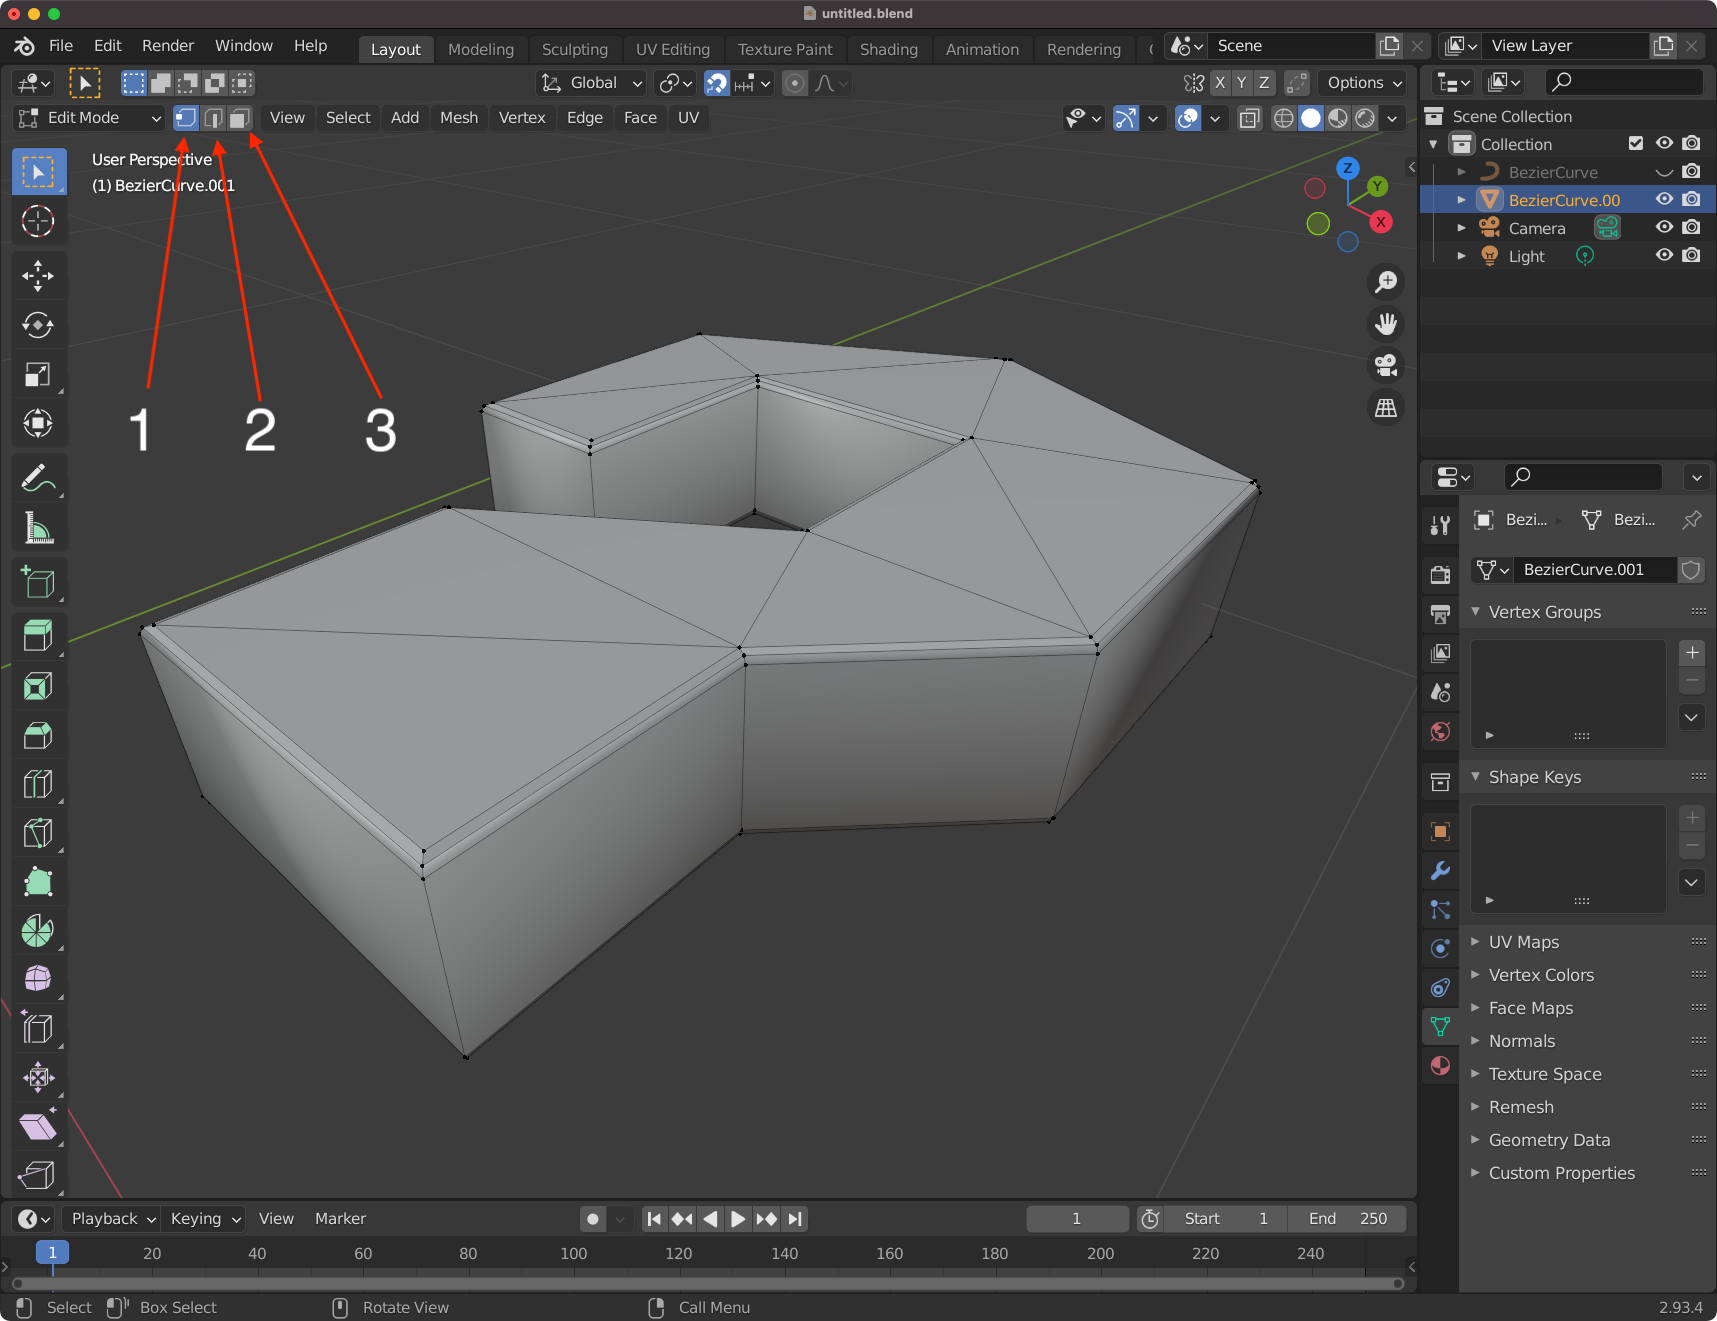 Switch vertex, edge and face by key on Edit Mode of Blender